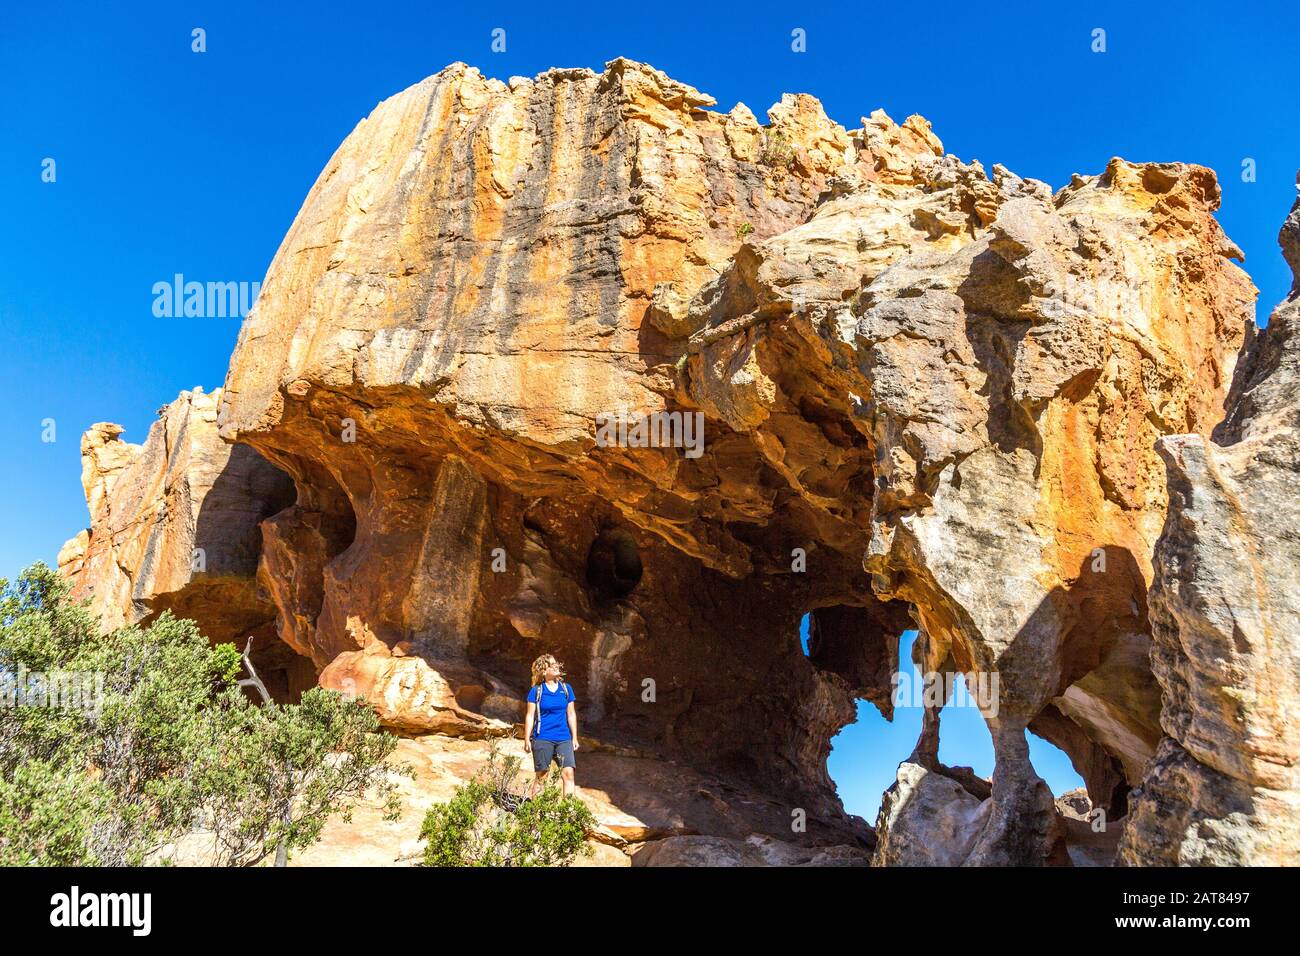 Young woman looking at a spectacular rock formation with arch and cave, Stadsaal, Cederberg Wilderness Area, South Africa Stock Photo